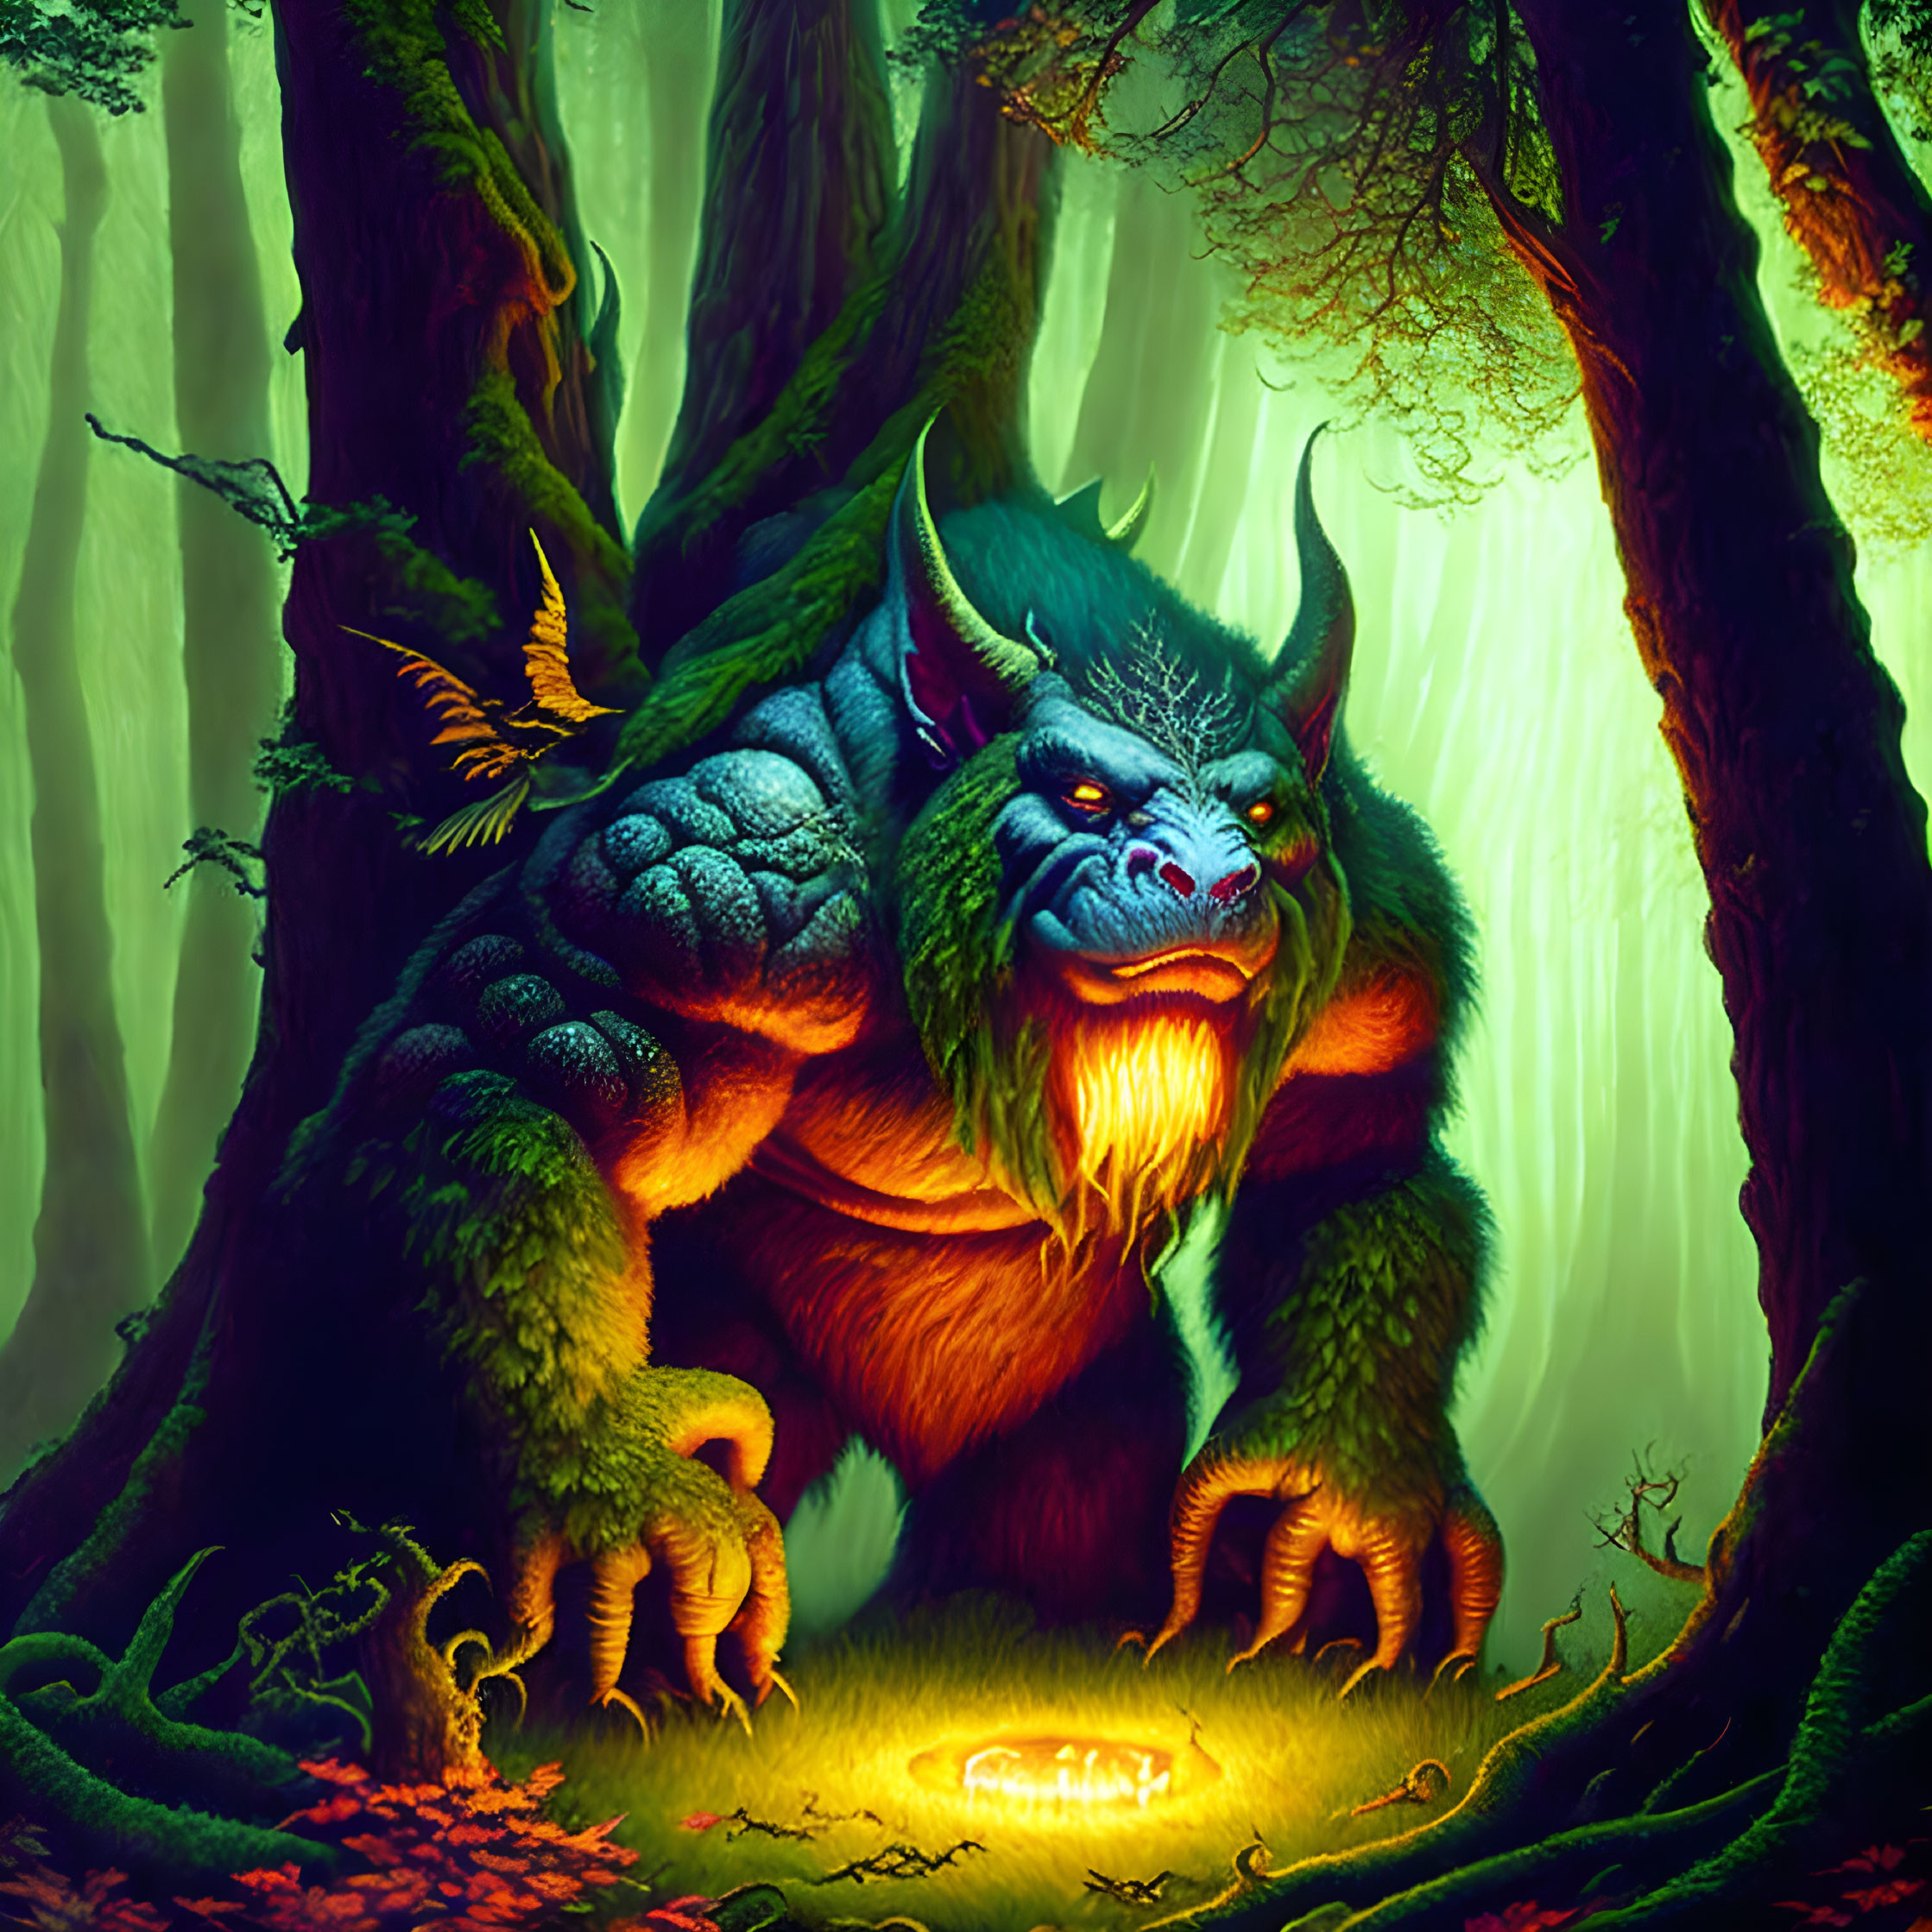 Blue-faced, fanged creature in green fur gazes at glowing object in enchanted forest